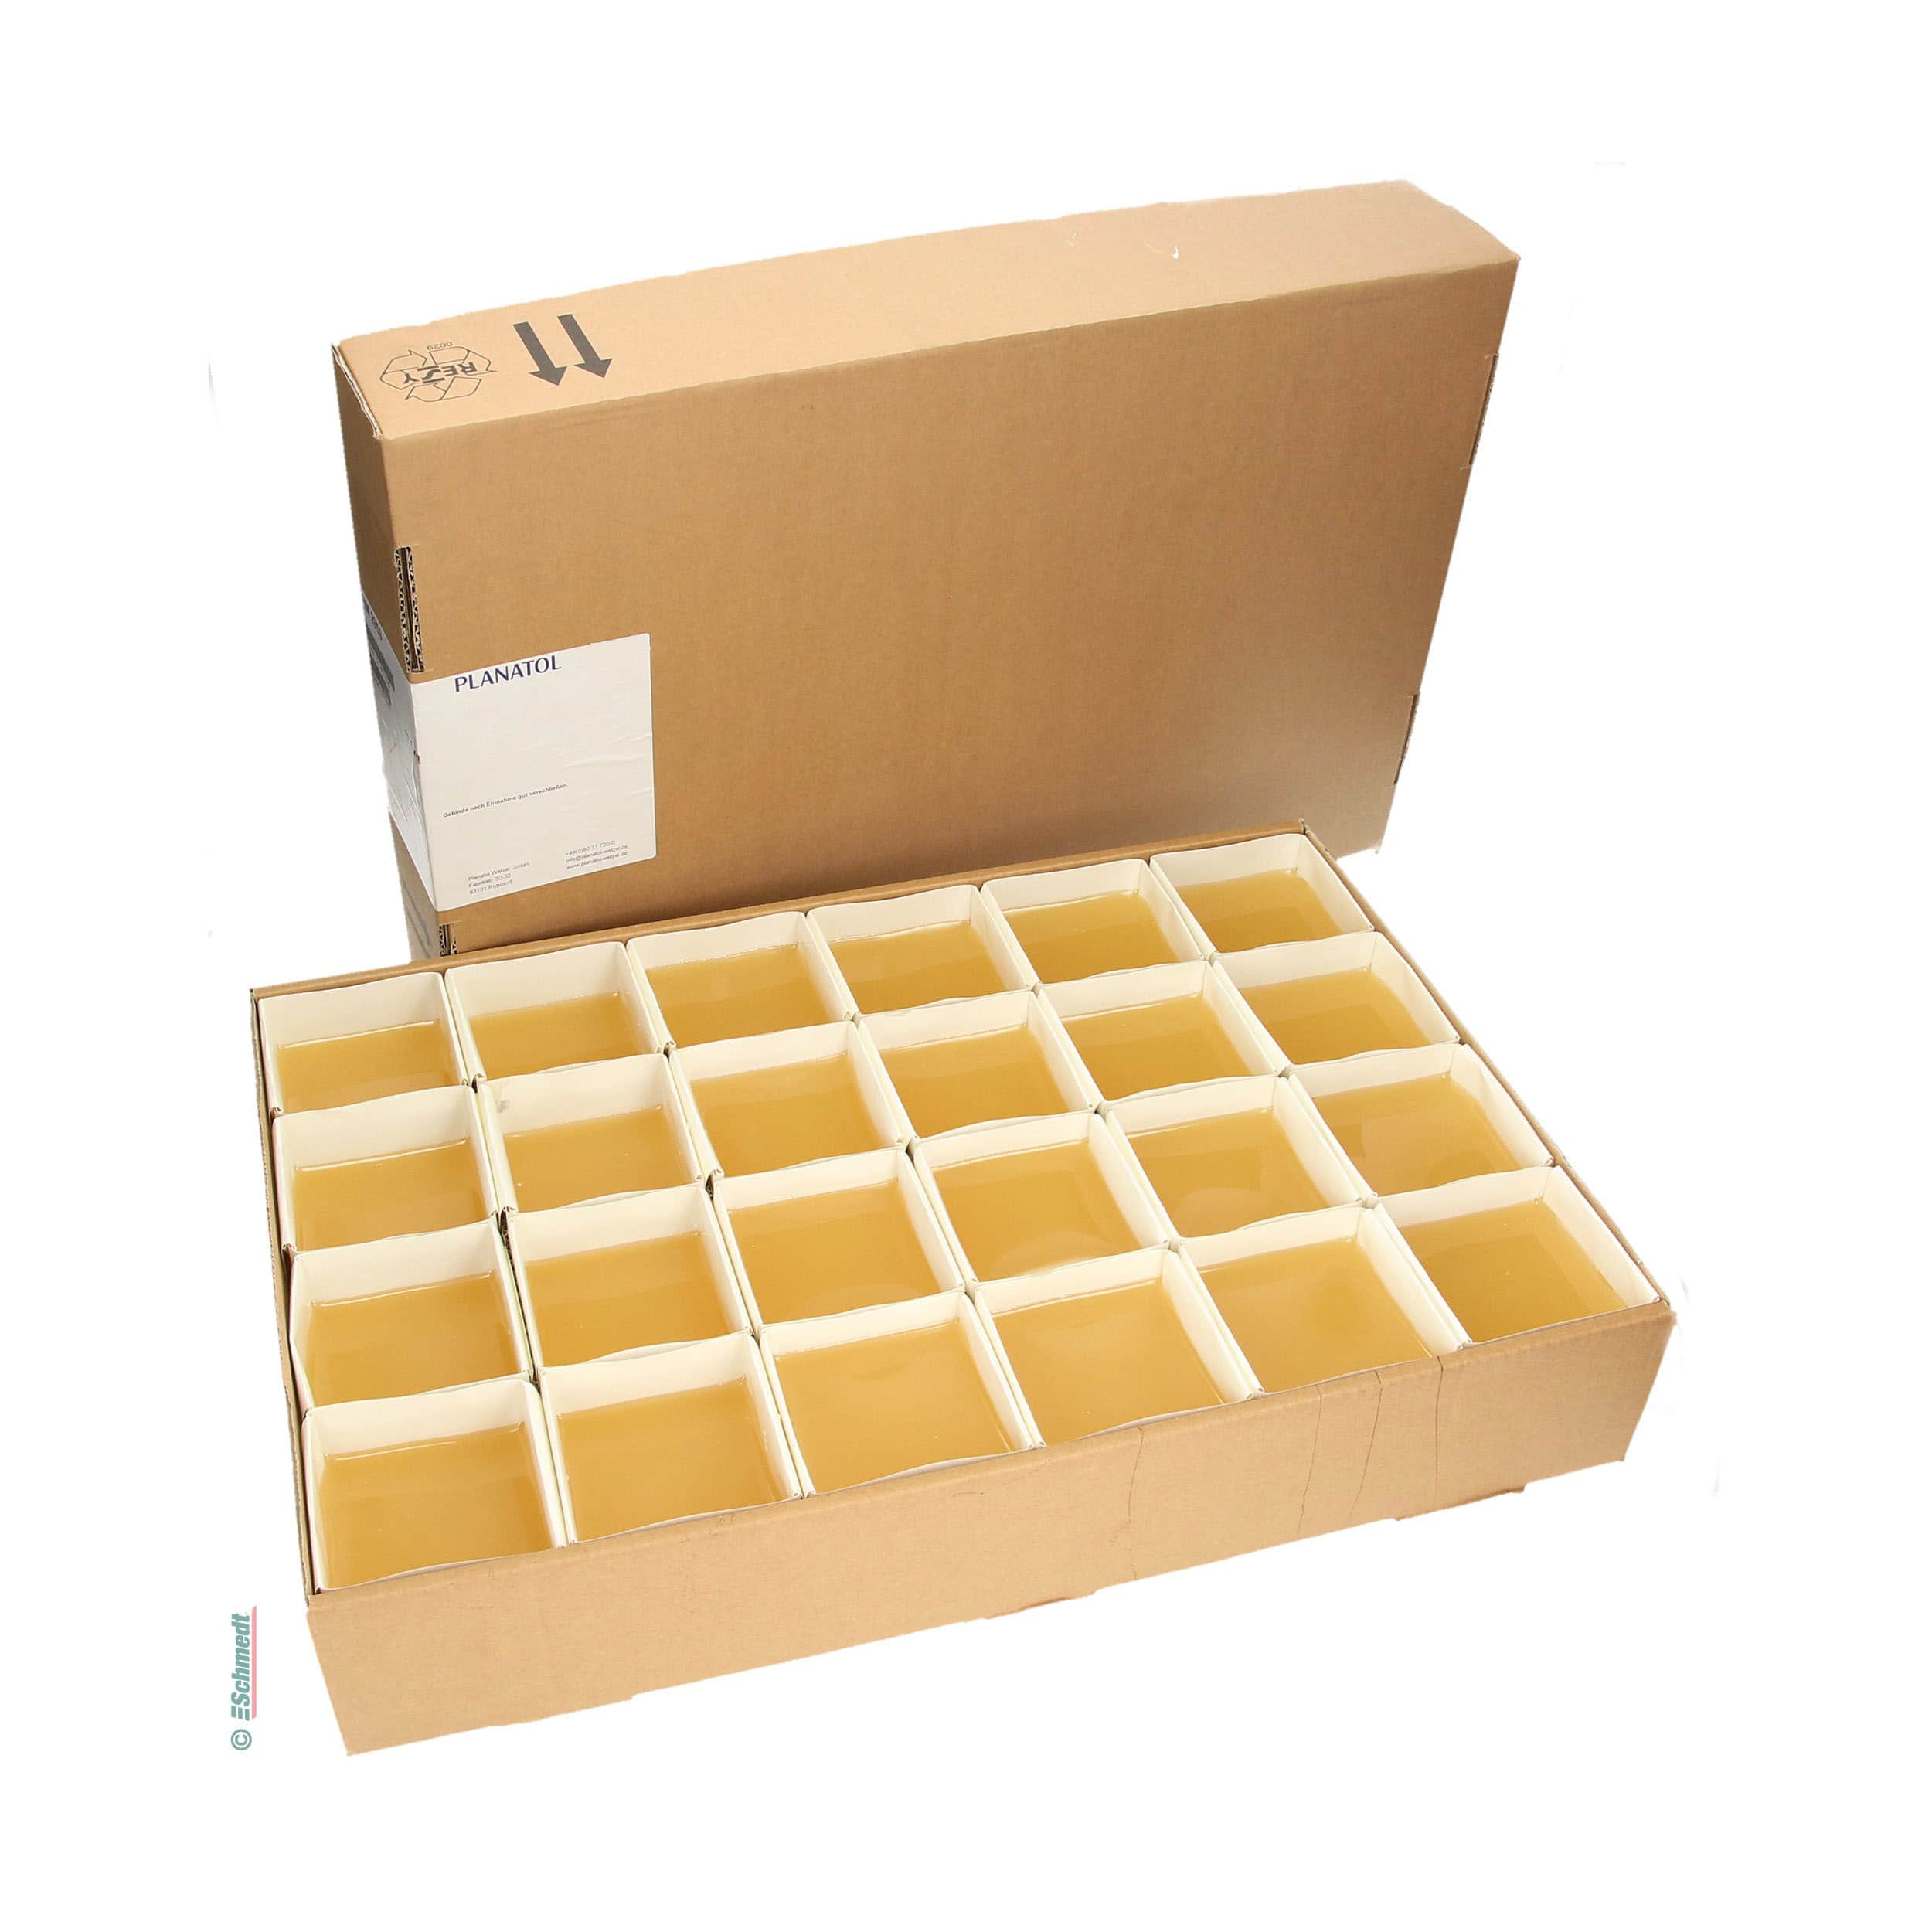 Planatol HM 2959 - hotmelt glue - Foiled cubes in cardboard box of 12.5 kgs - side gluing on perfect binders... - image-1